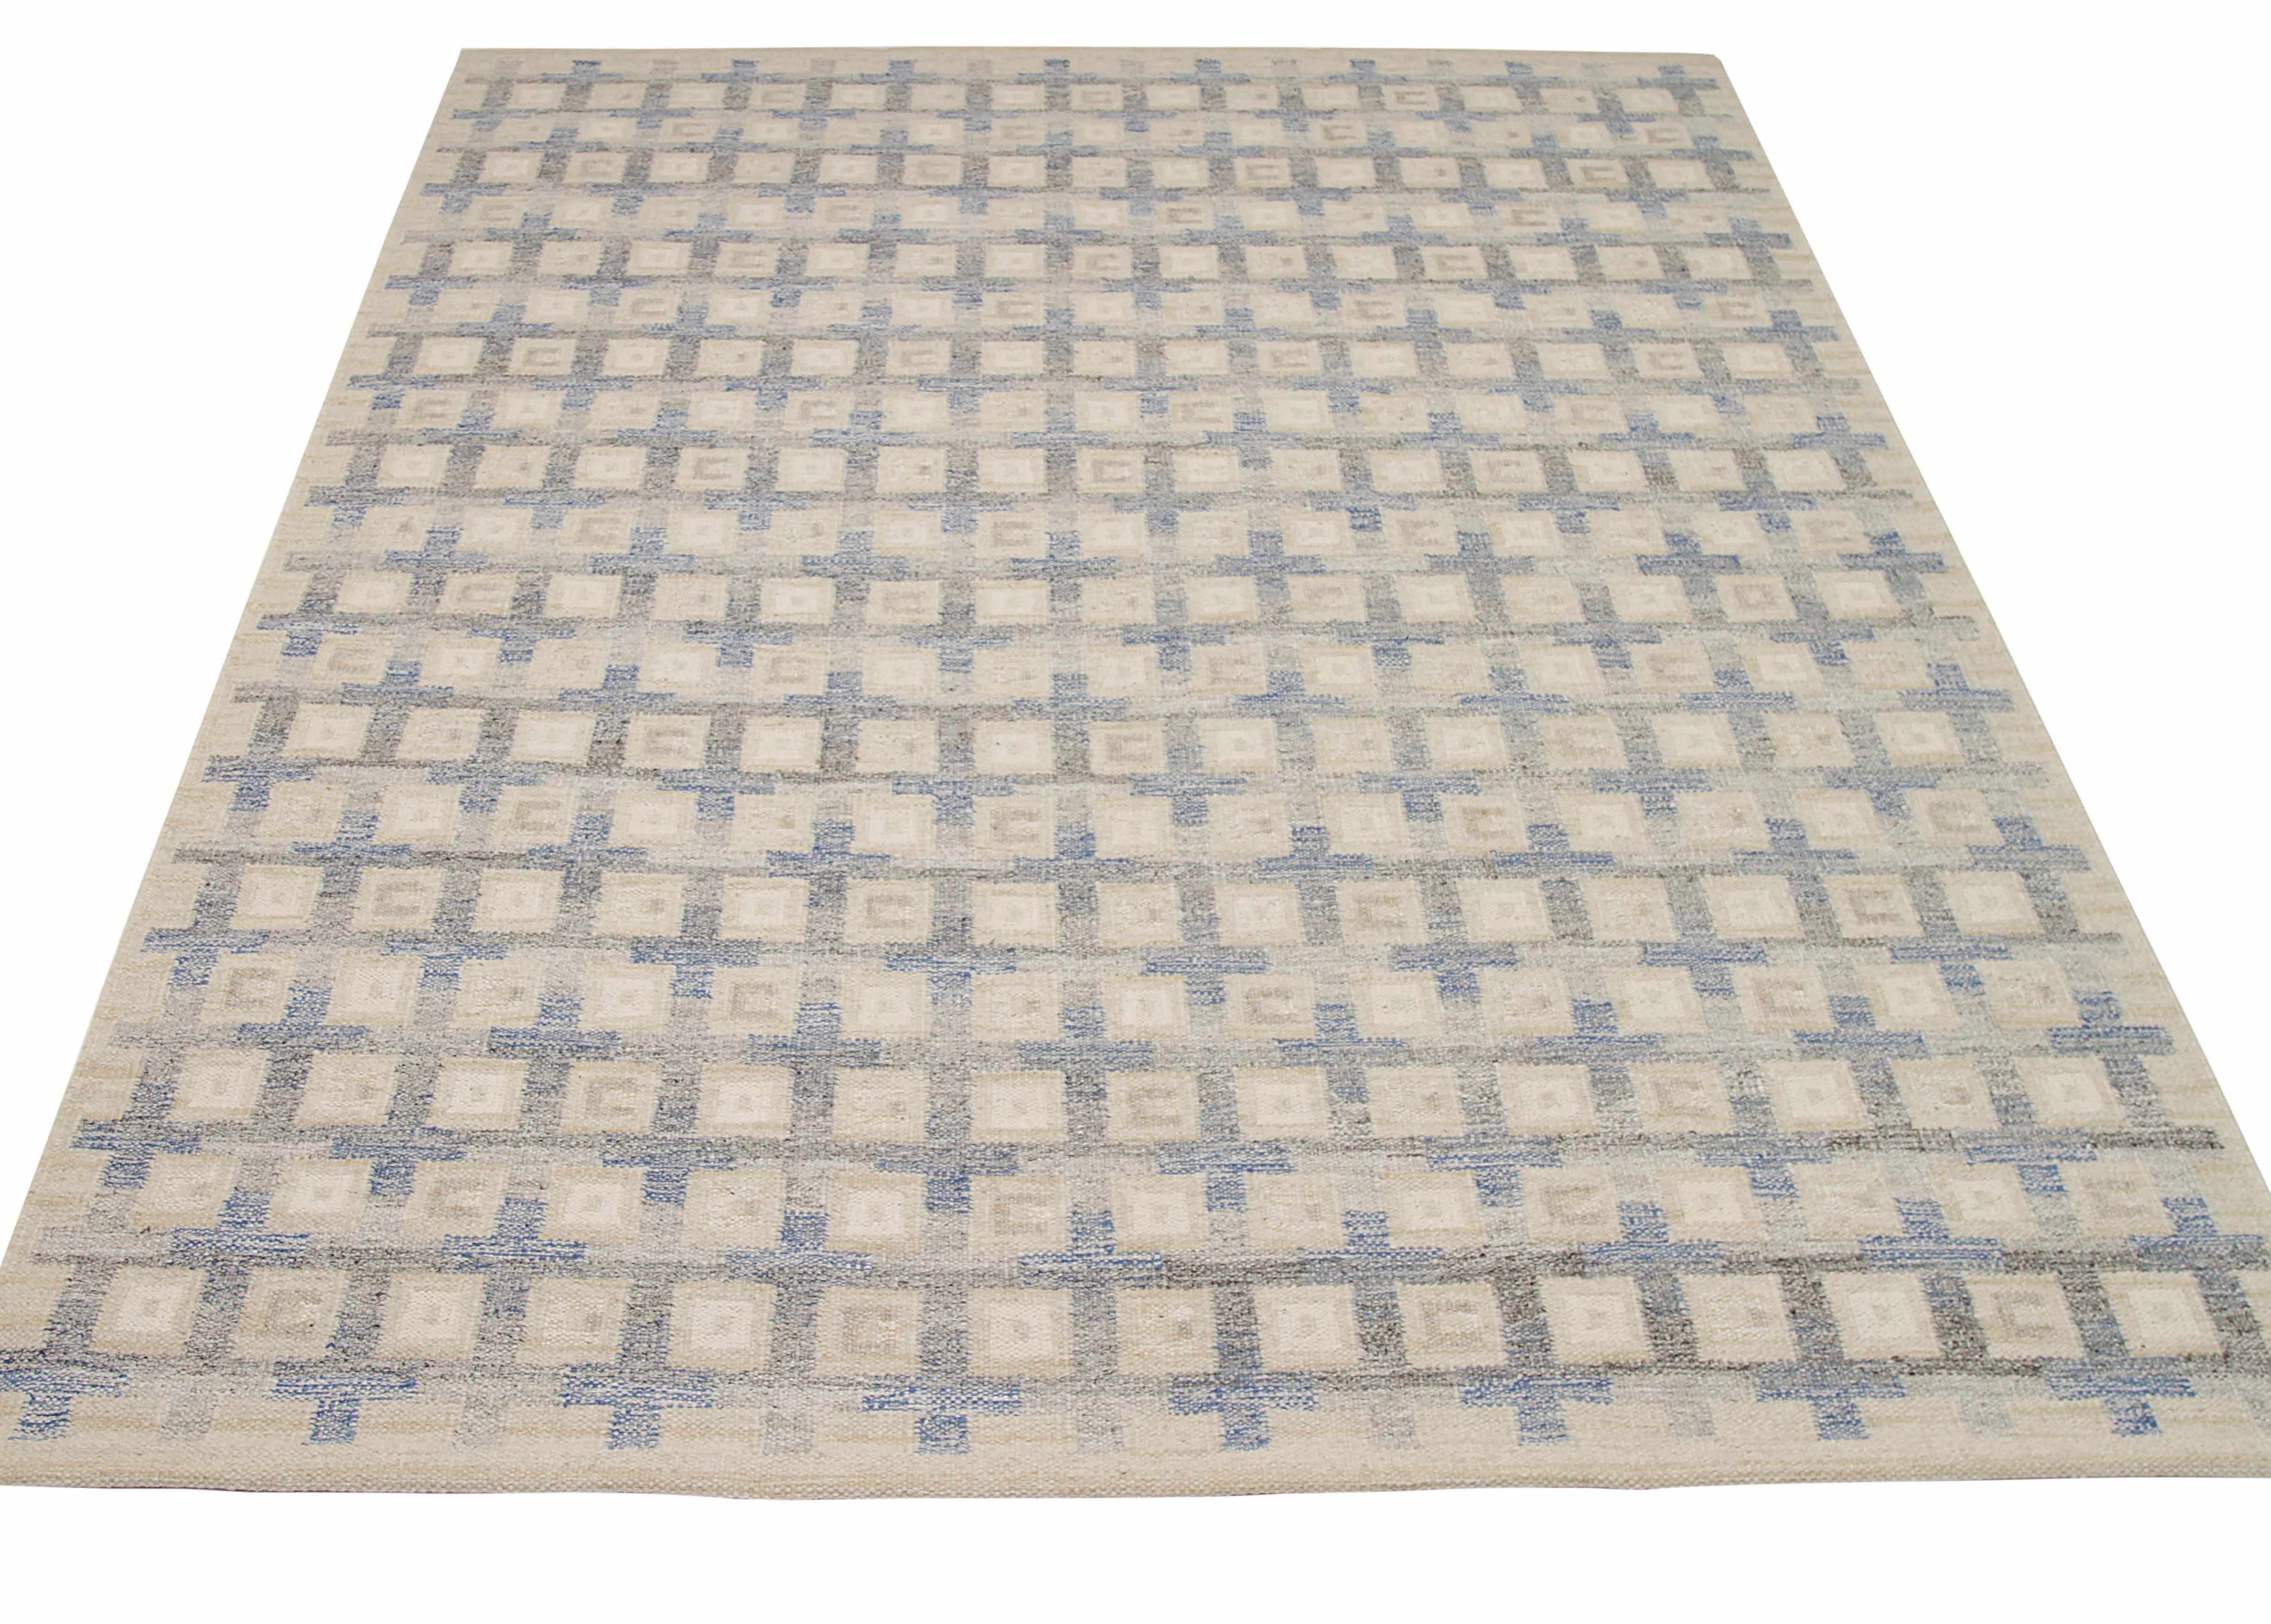 New Indian area rug handwoven from the finest sheep’s wool. It’s colored with all-natural vegetable dyes that are safe for humans and pets. It’s a traditional Scandinavian design handwoven by expert artisans. It’s a lovely area rug that can be